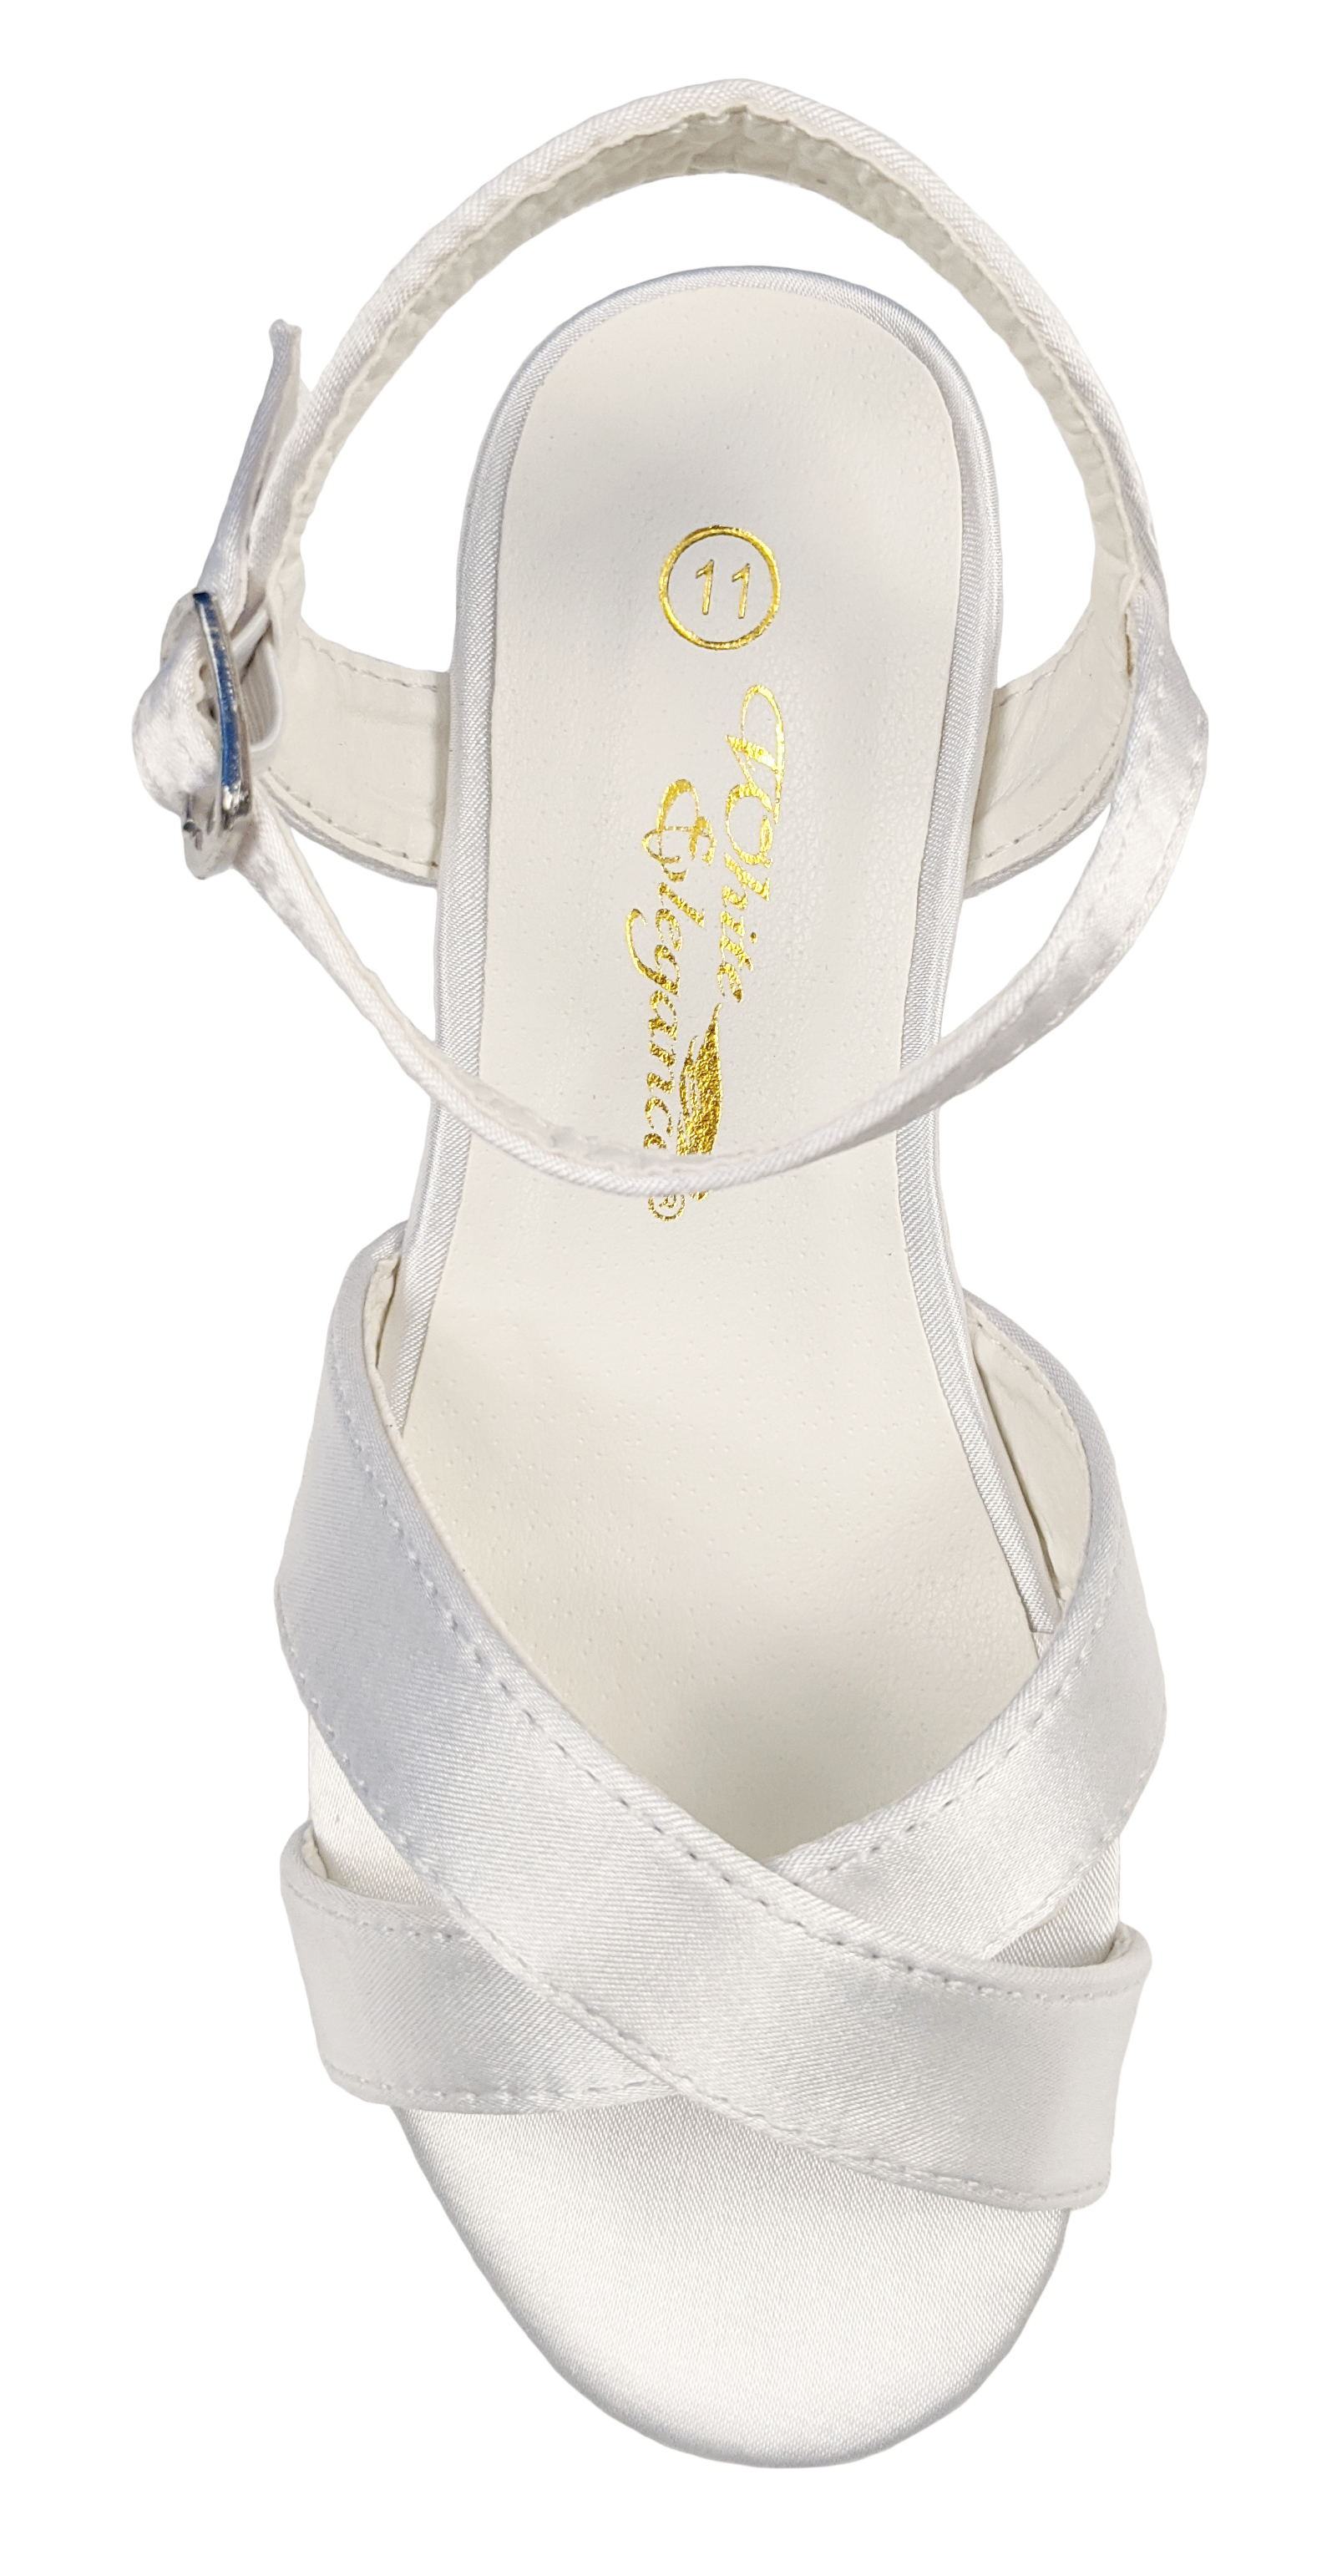 Little Things Mean A Lot Girls White Satin Dress Sandals with Heel (Little Girl, Big Girl) - image 4 of 6